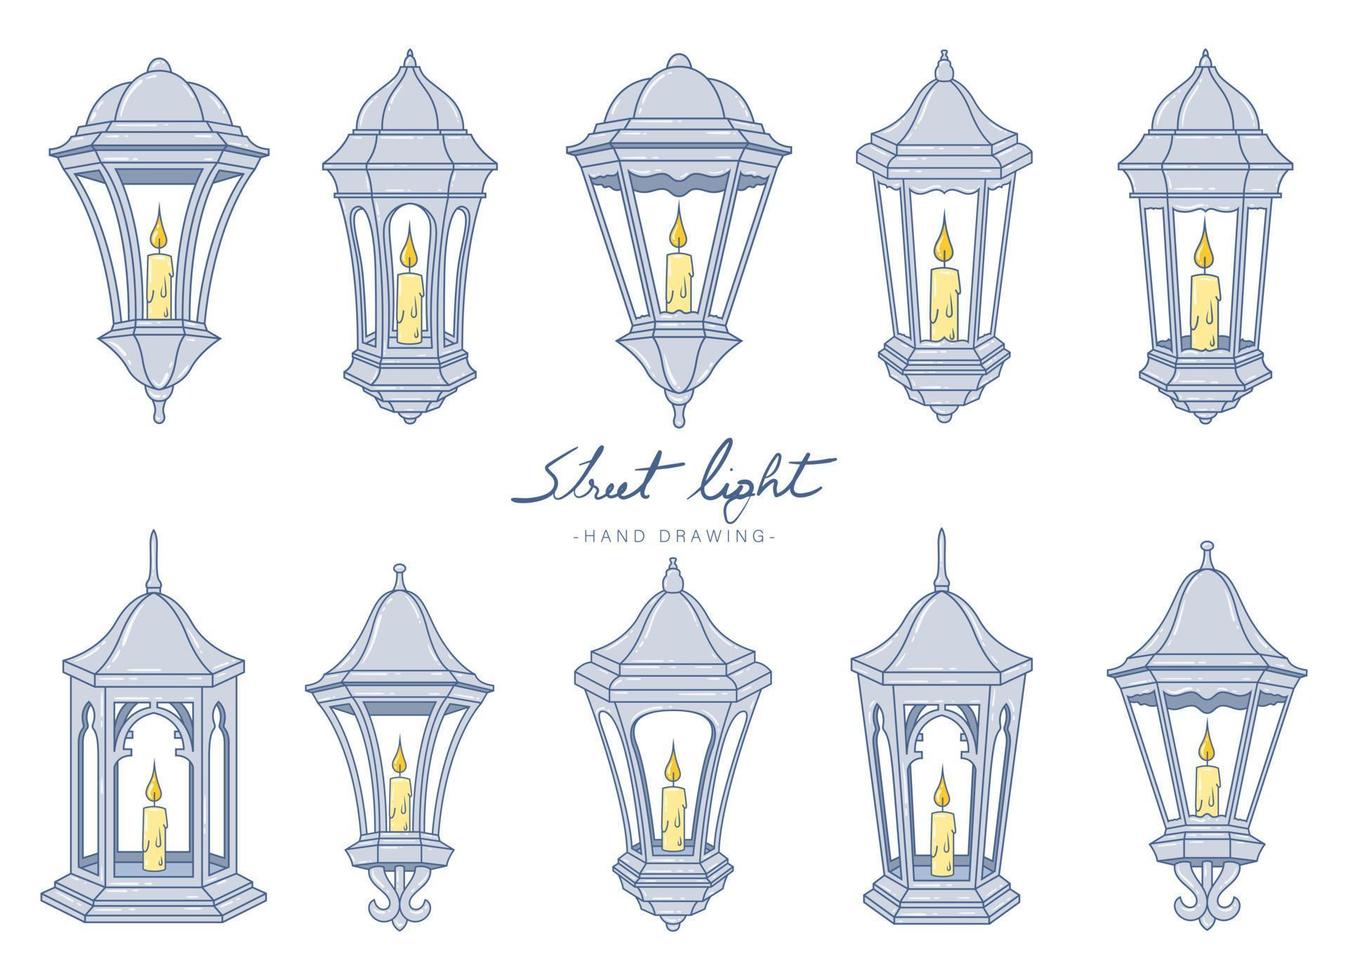 Vintage lamp vector design illustration isolated on background